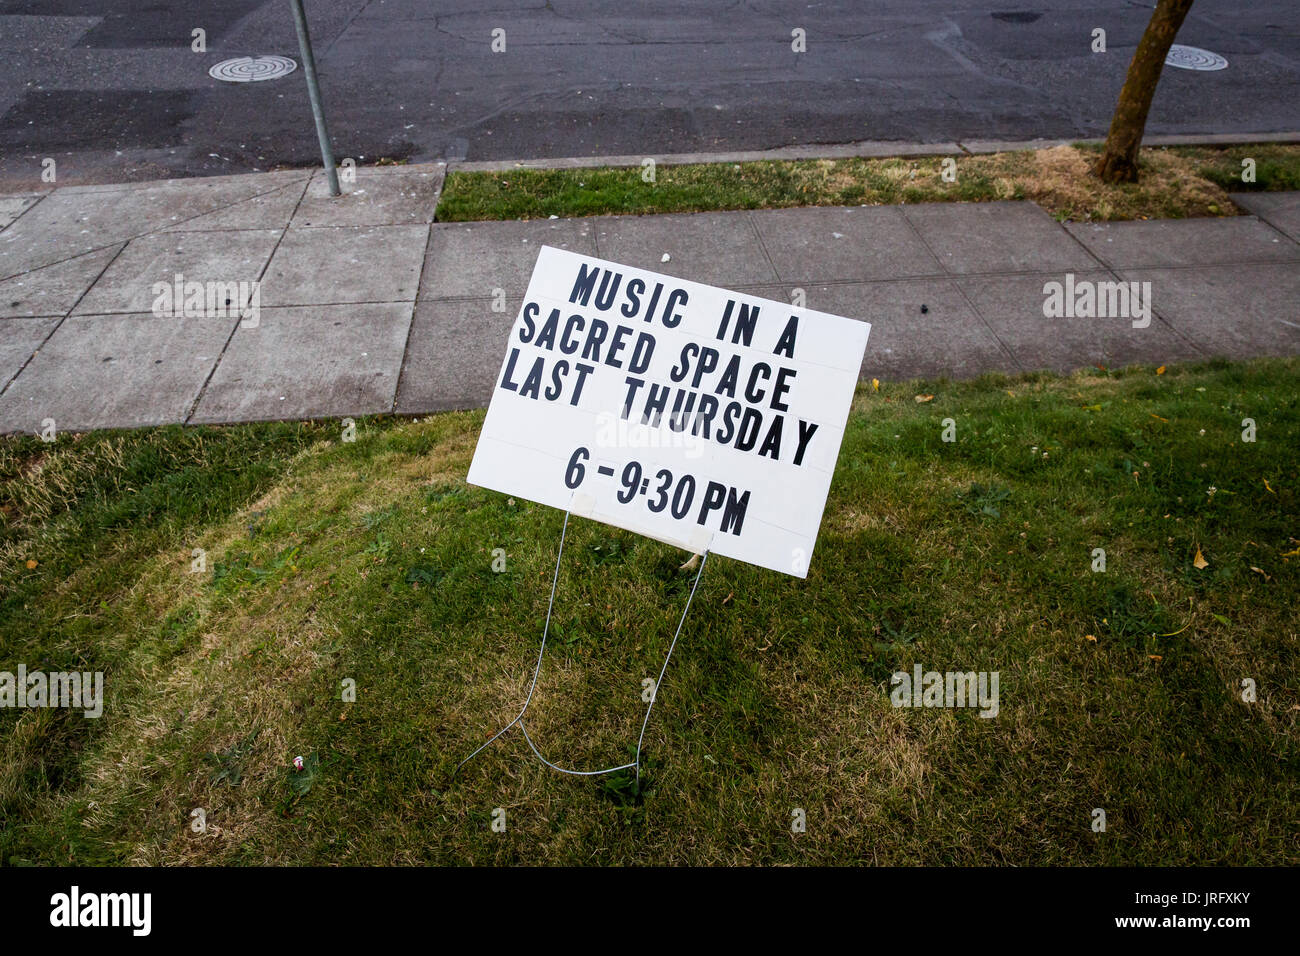 Lawn sign in Portland Oregon that reads: 'Music is a sacred space, Last Thursday 6-9:30pm' Stock Photo